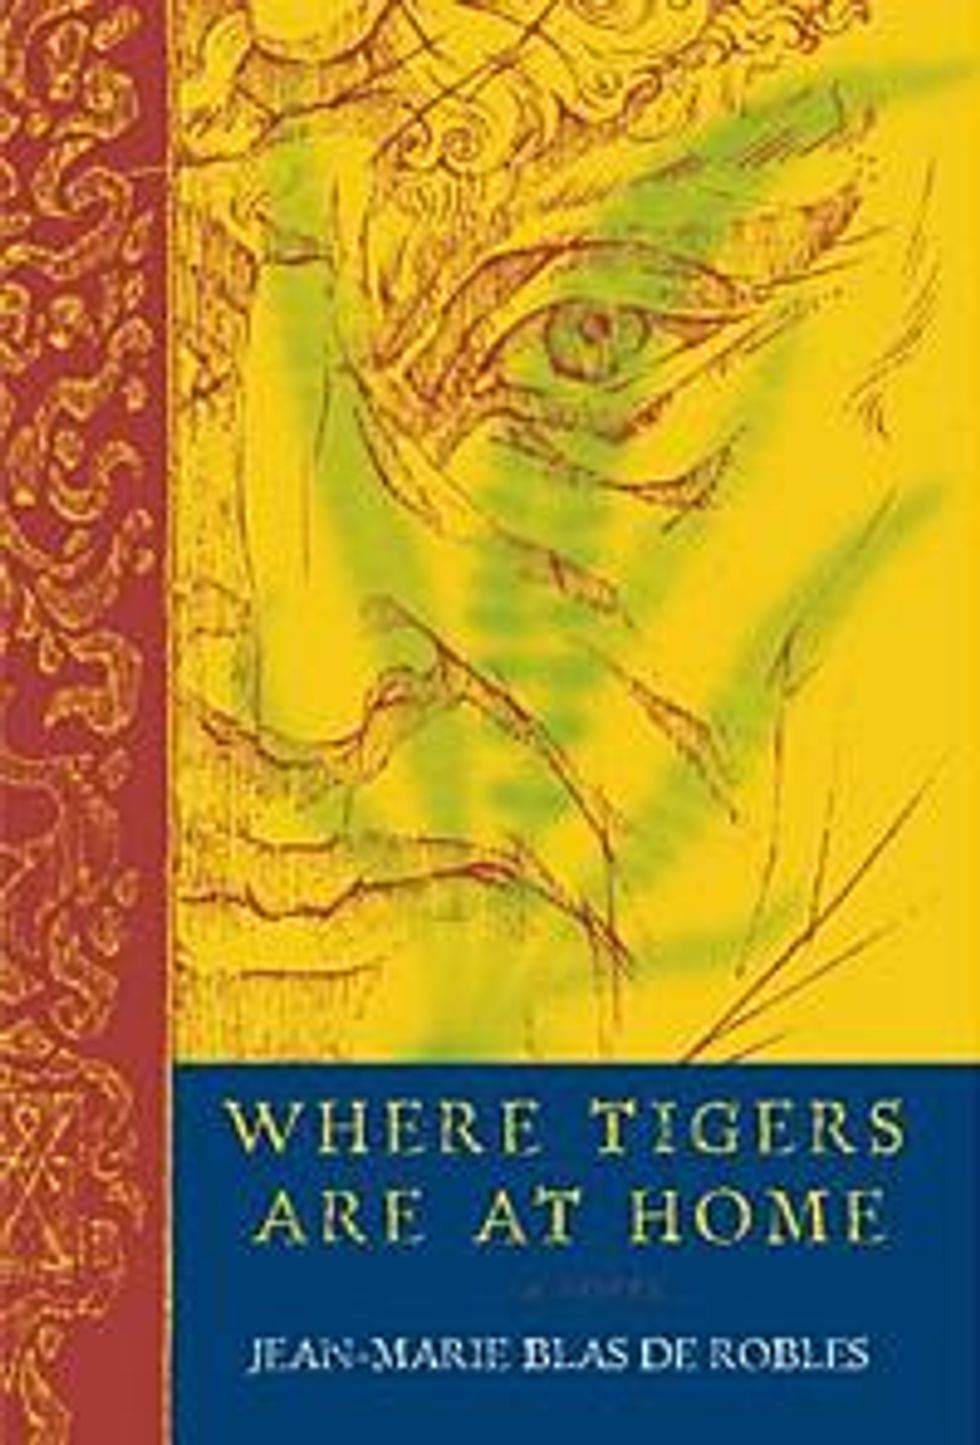 Where-tigers-are-at-homex400